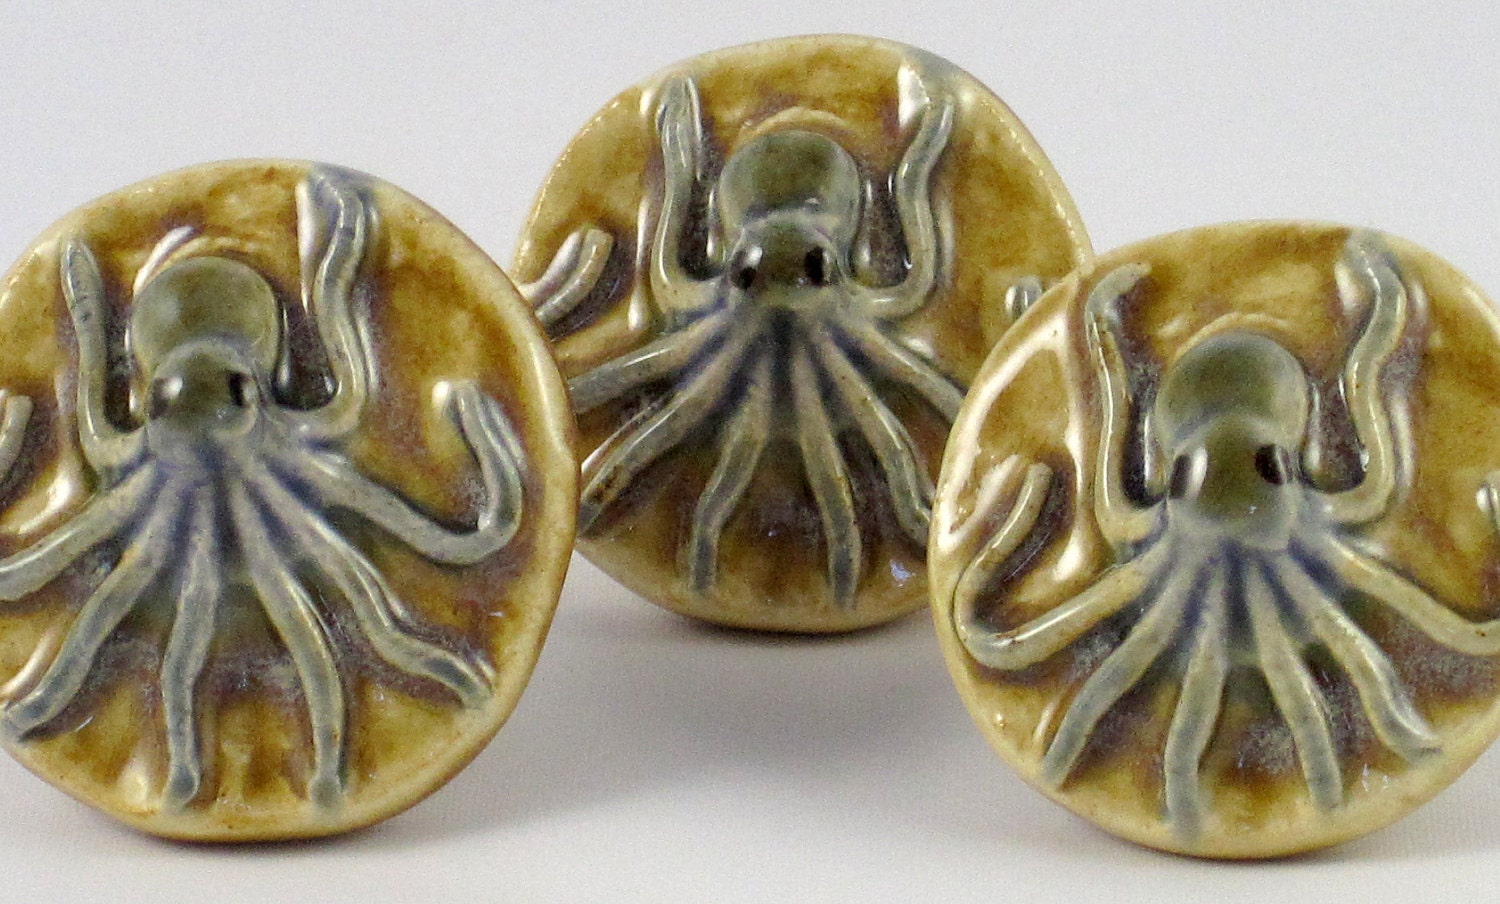 Nautical Octopus Drawer Pull and Knob by KinnakeetClay